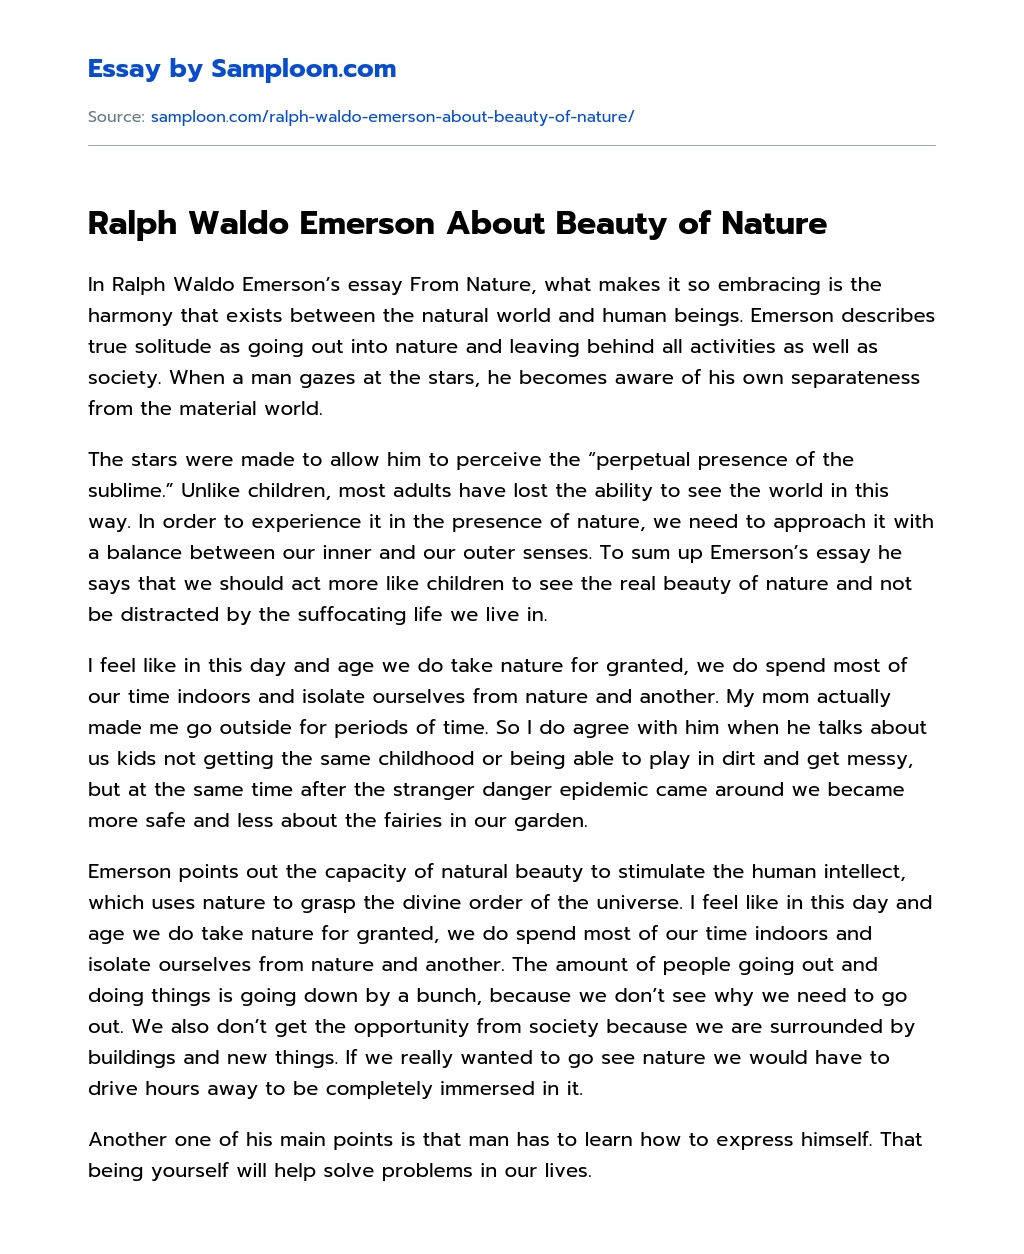 Ralph Waldo Emerson About Beauty of Nature Analytical Essay essay